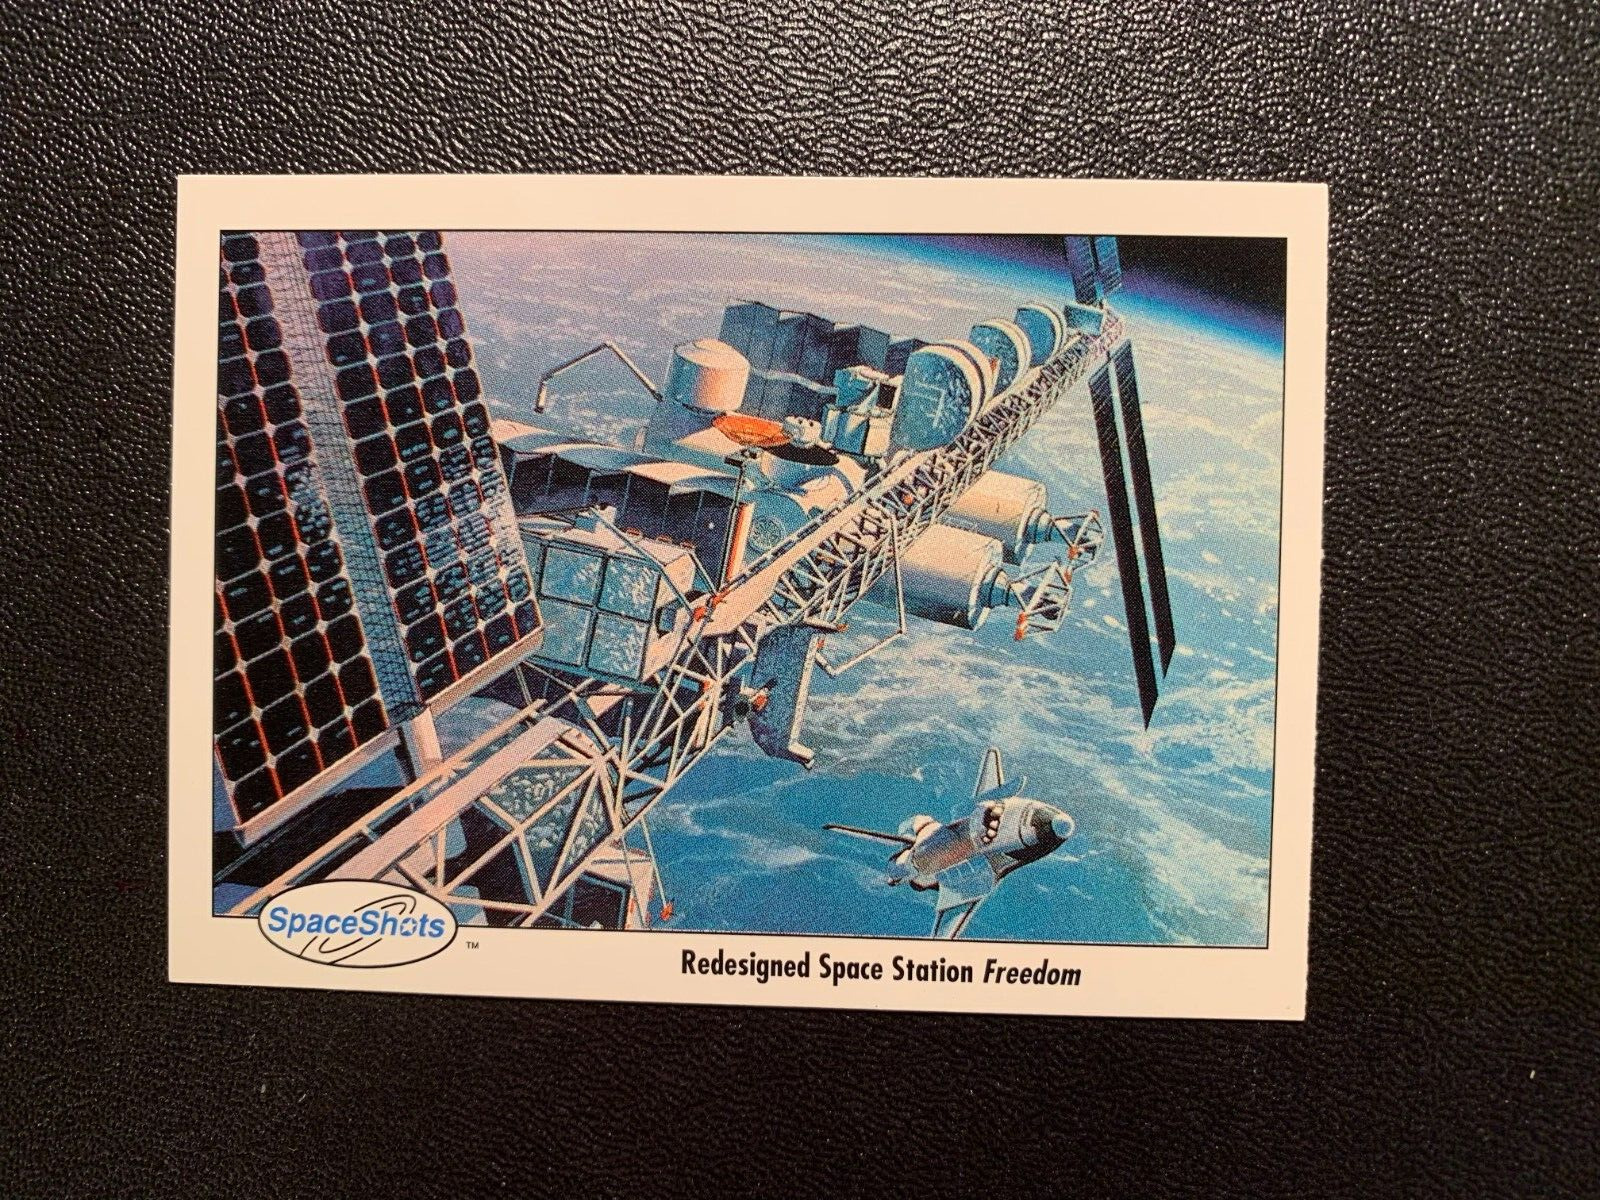 SPACESHOTS Redesigned Space Station Freedom  Card 1991 Space Ventures Card #0215